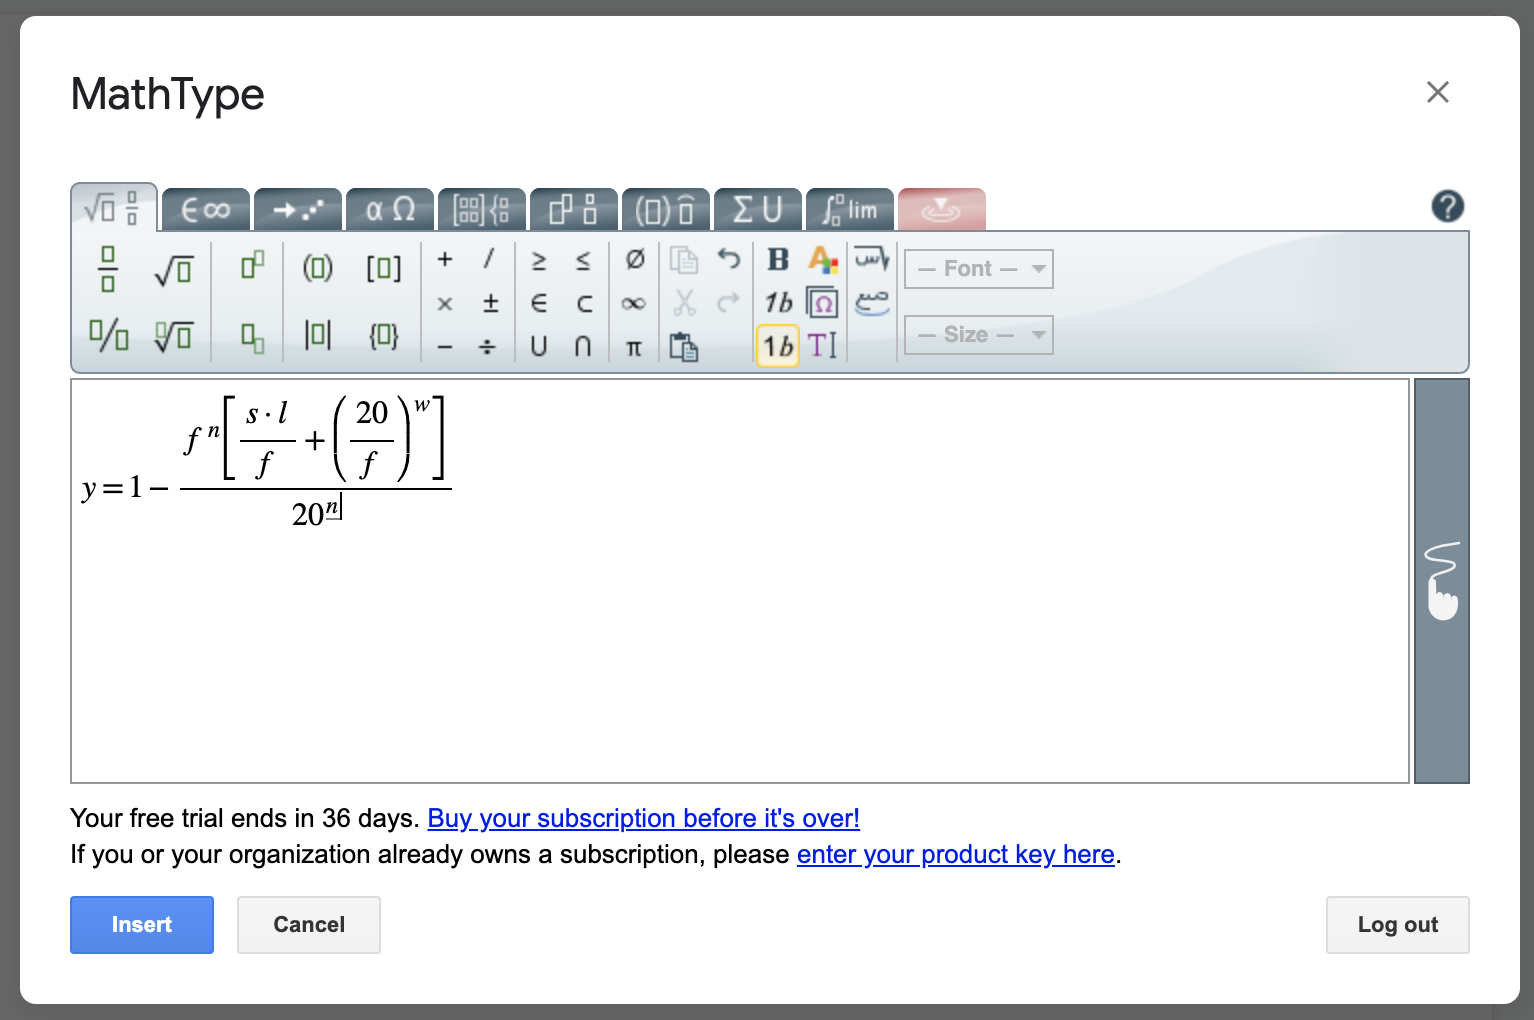 The MathType add-on for Google Docs.